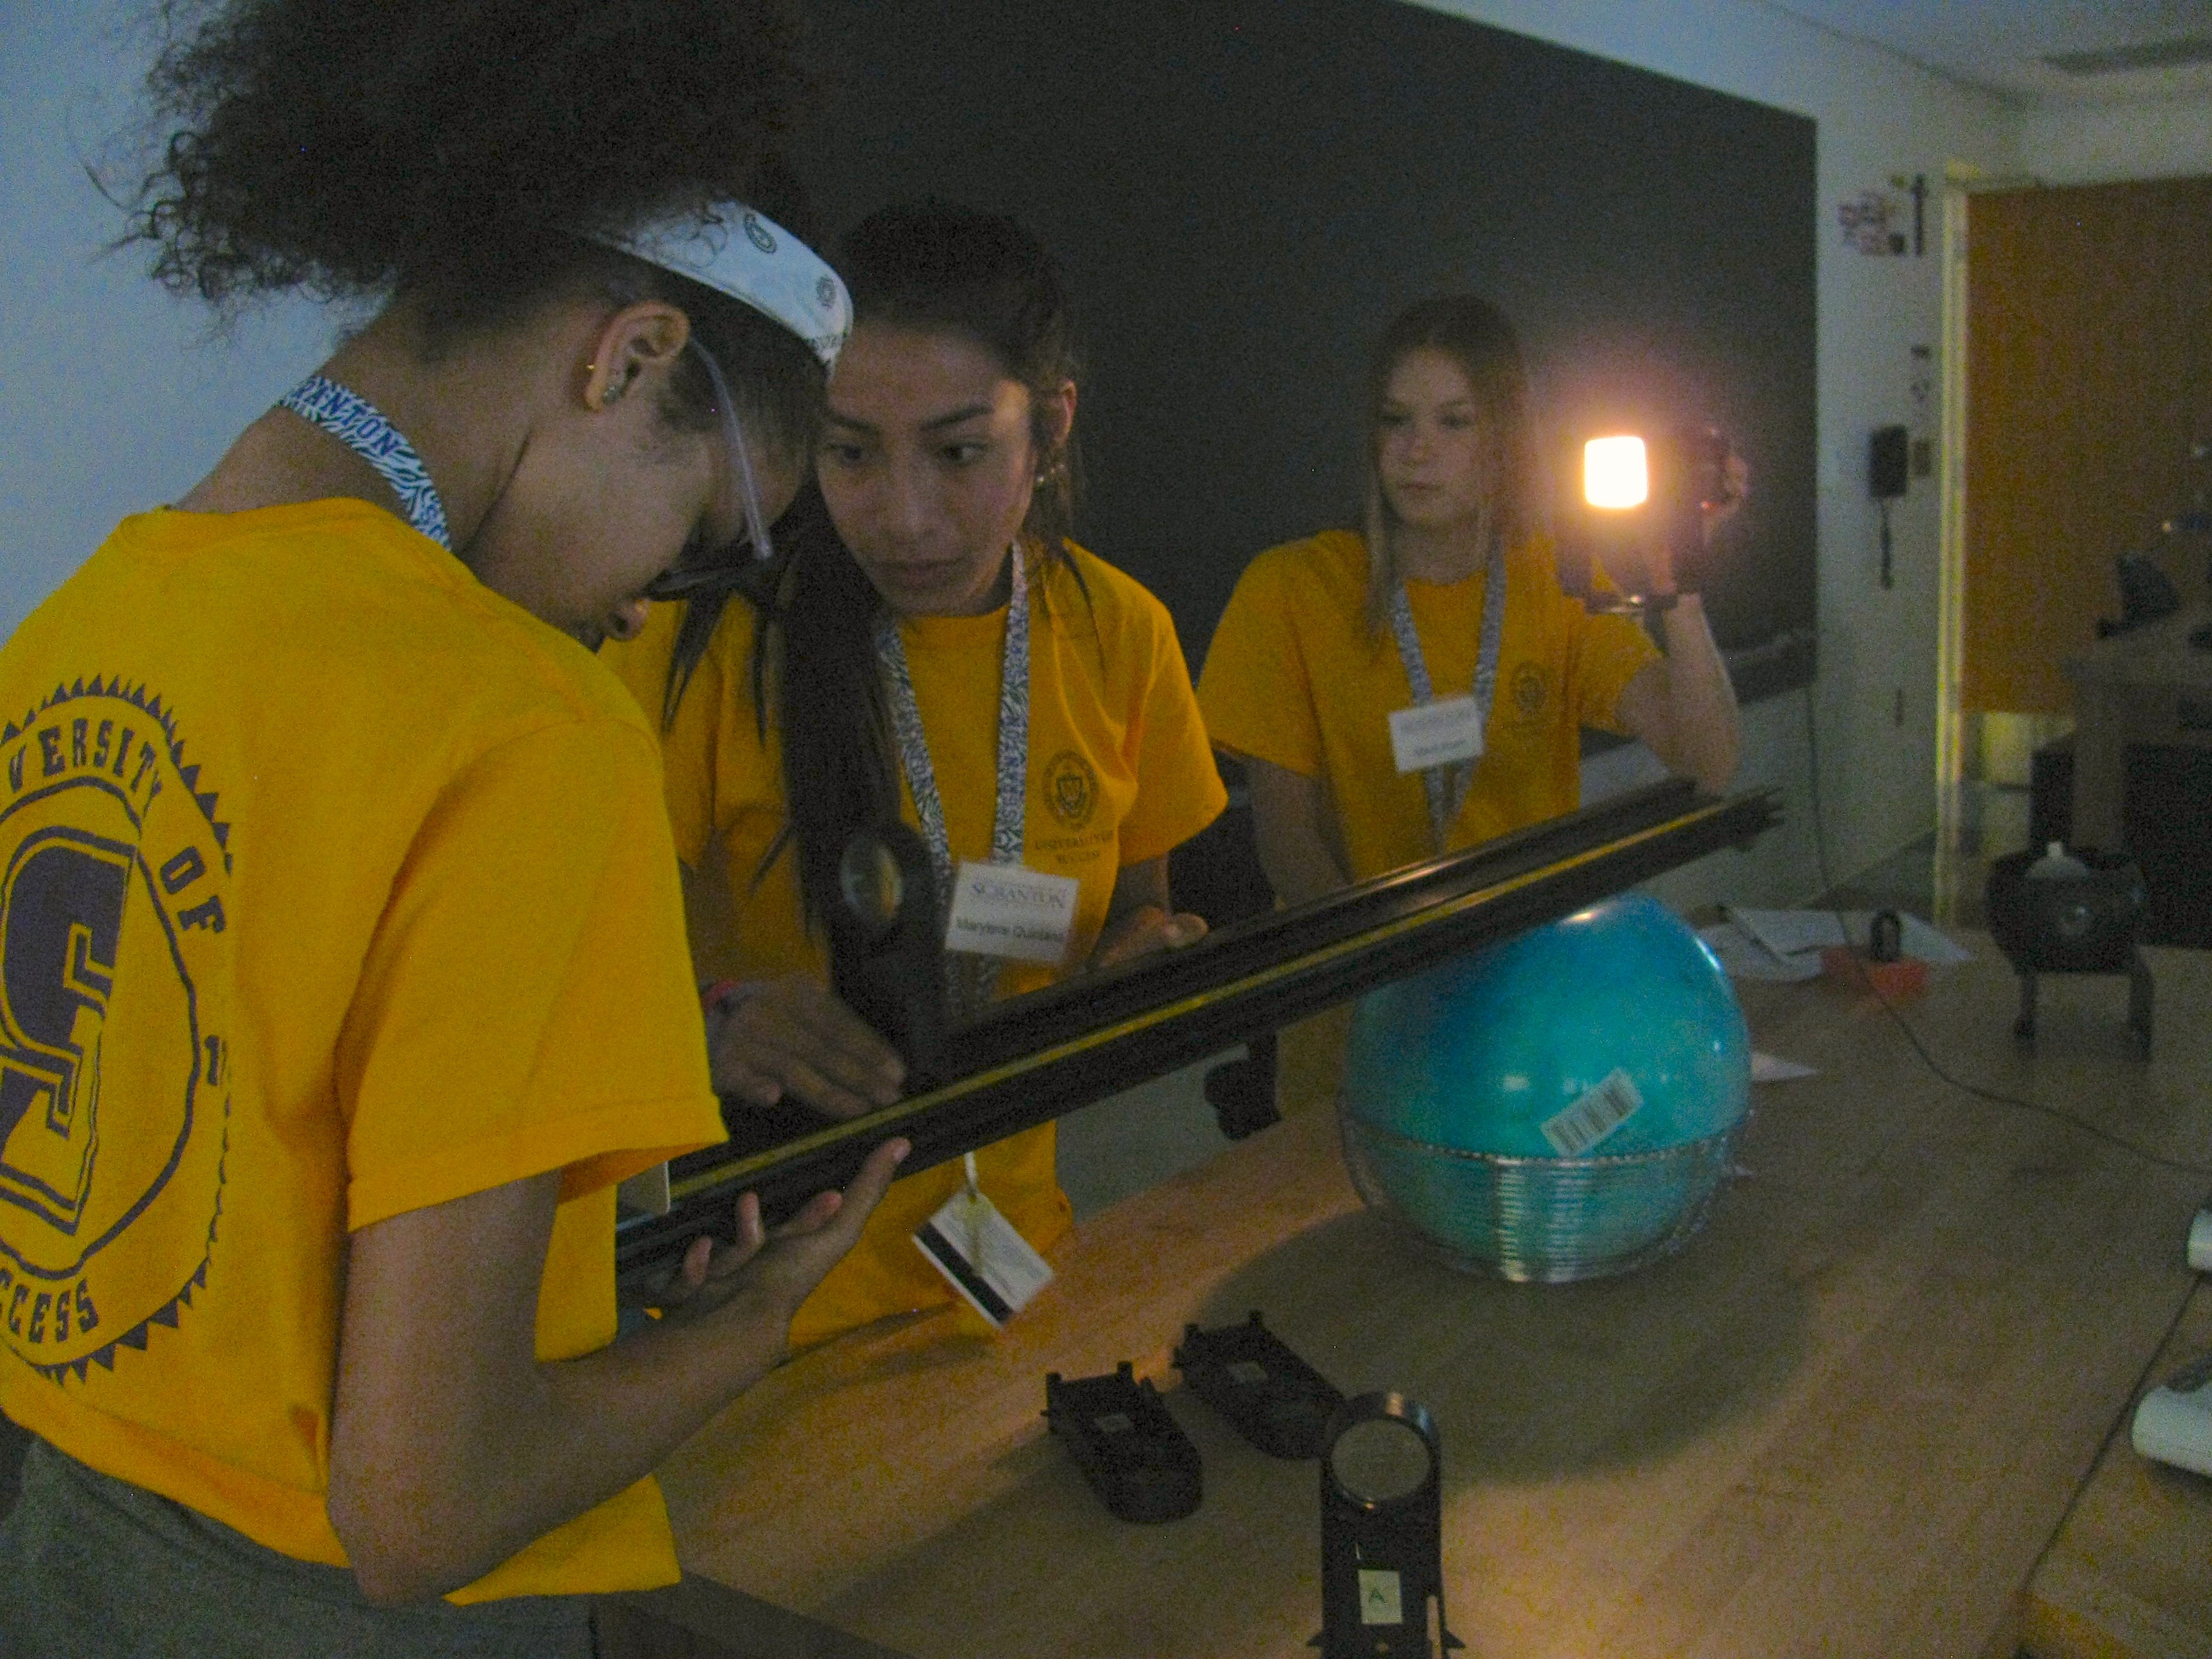 From left: University of Success students Maria Eduarda Do Vale, Marytere Quintana and Mauri Kurin participate in a hands-on project for a physics class taught by University professors as part of the Summer Institute.